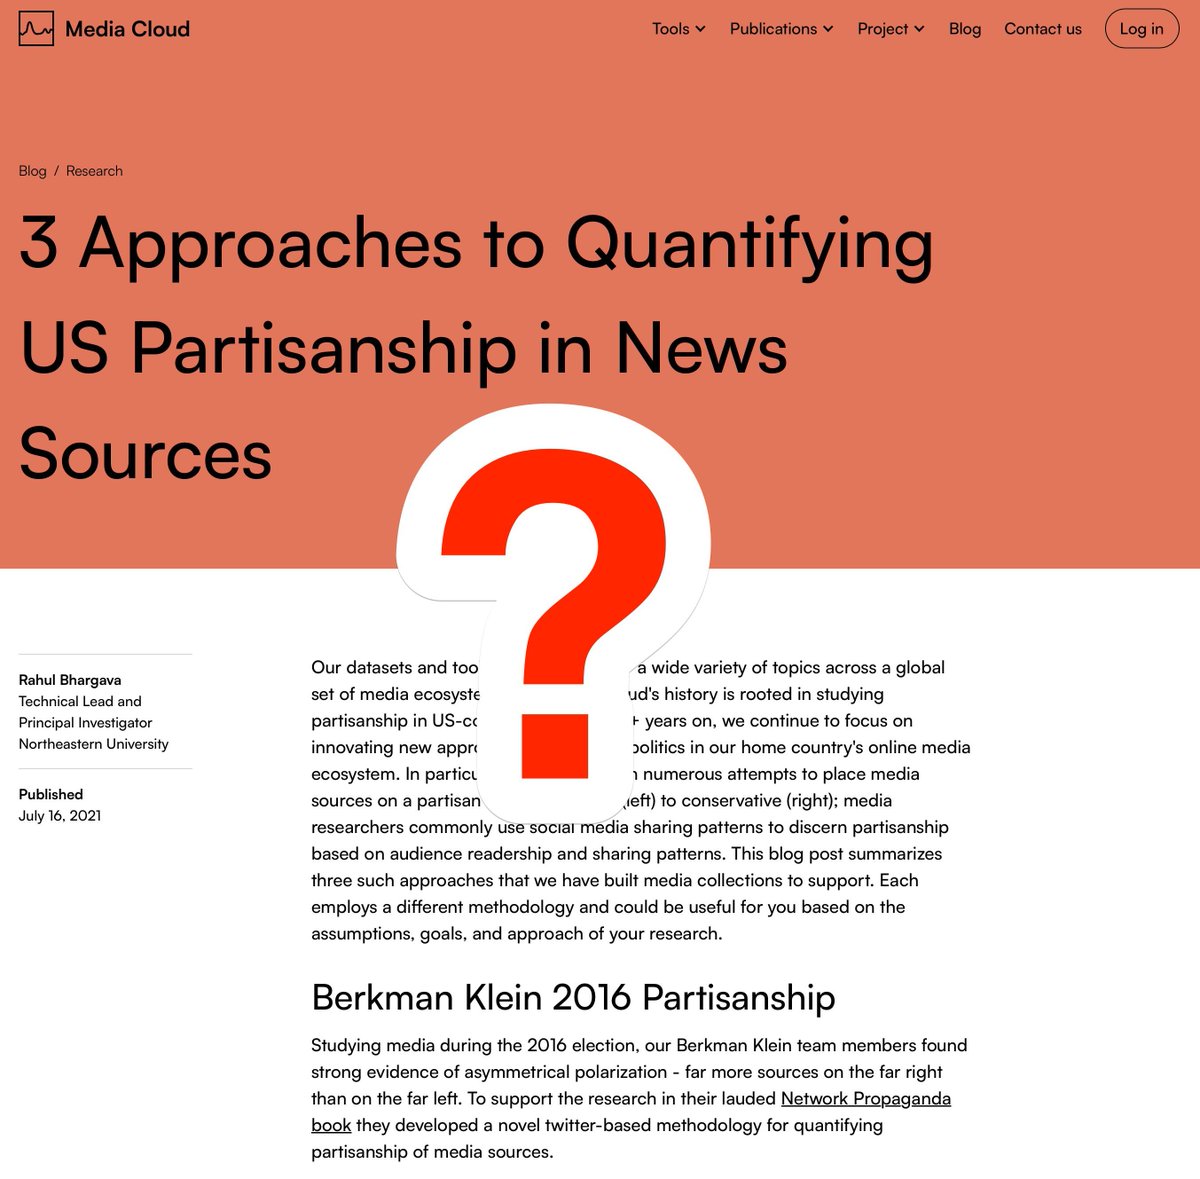 Computation social science Q: what do you find is the best research option for a contemporary dataset quantifying partisanship of US online news media sources? Our internal Media Cloud options used social-sharing-based metrics we can no longer replicate so they're dated.